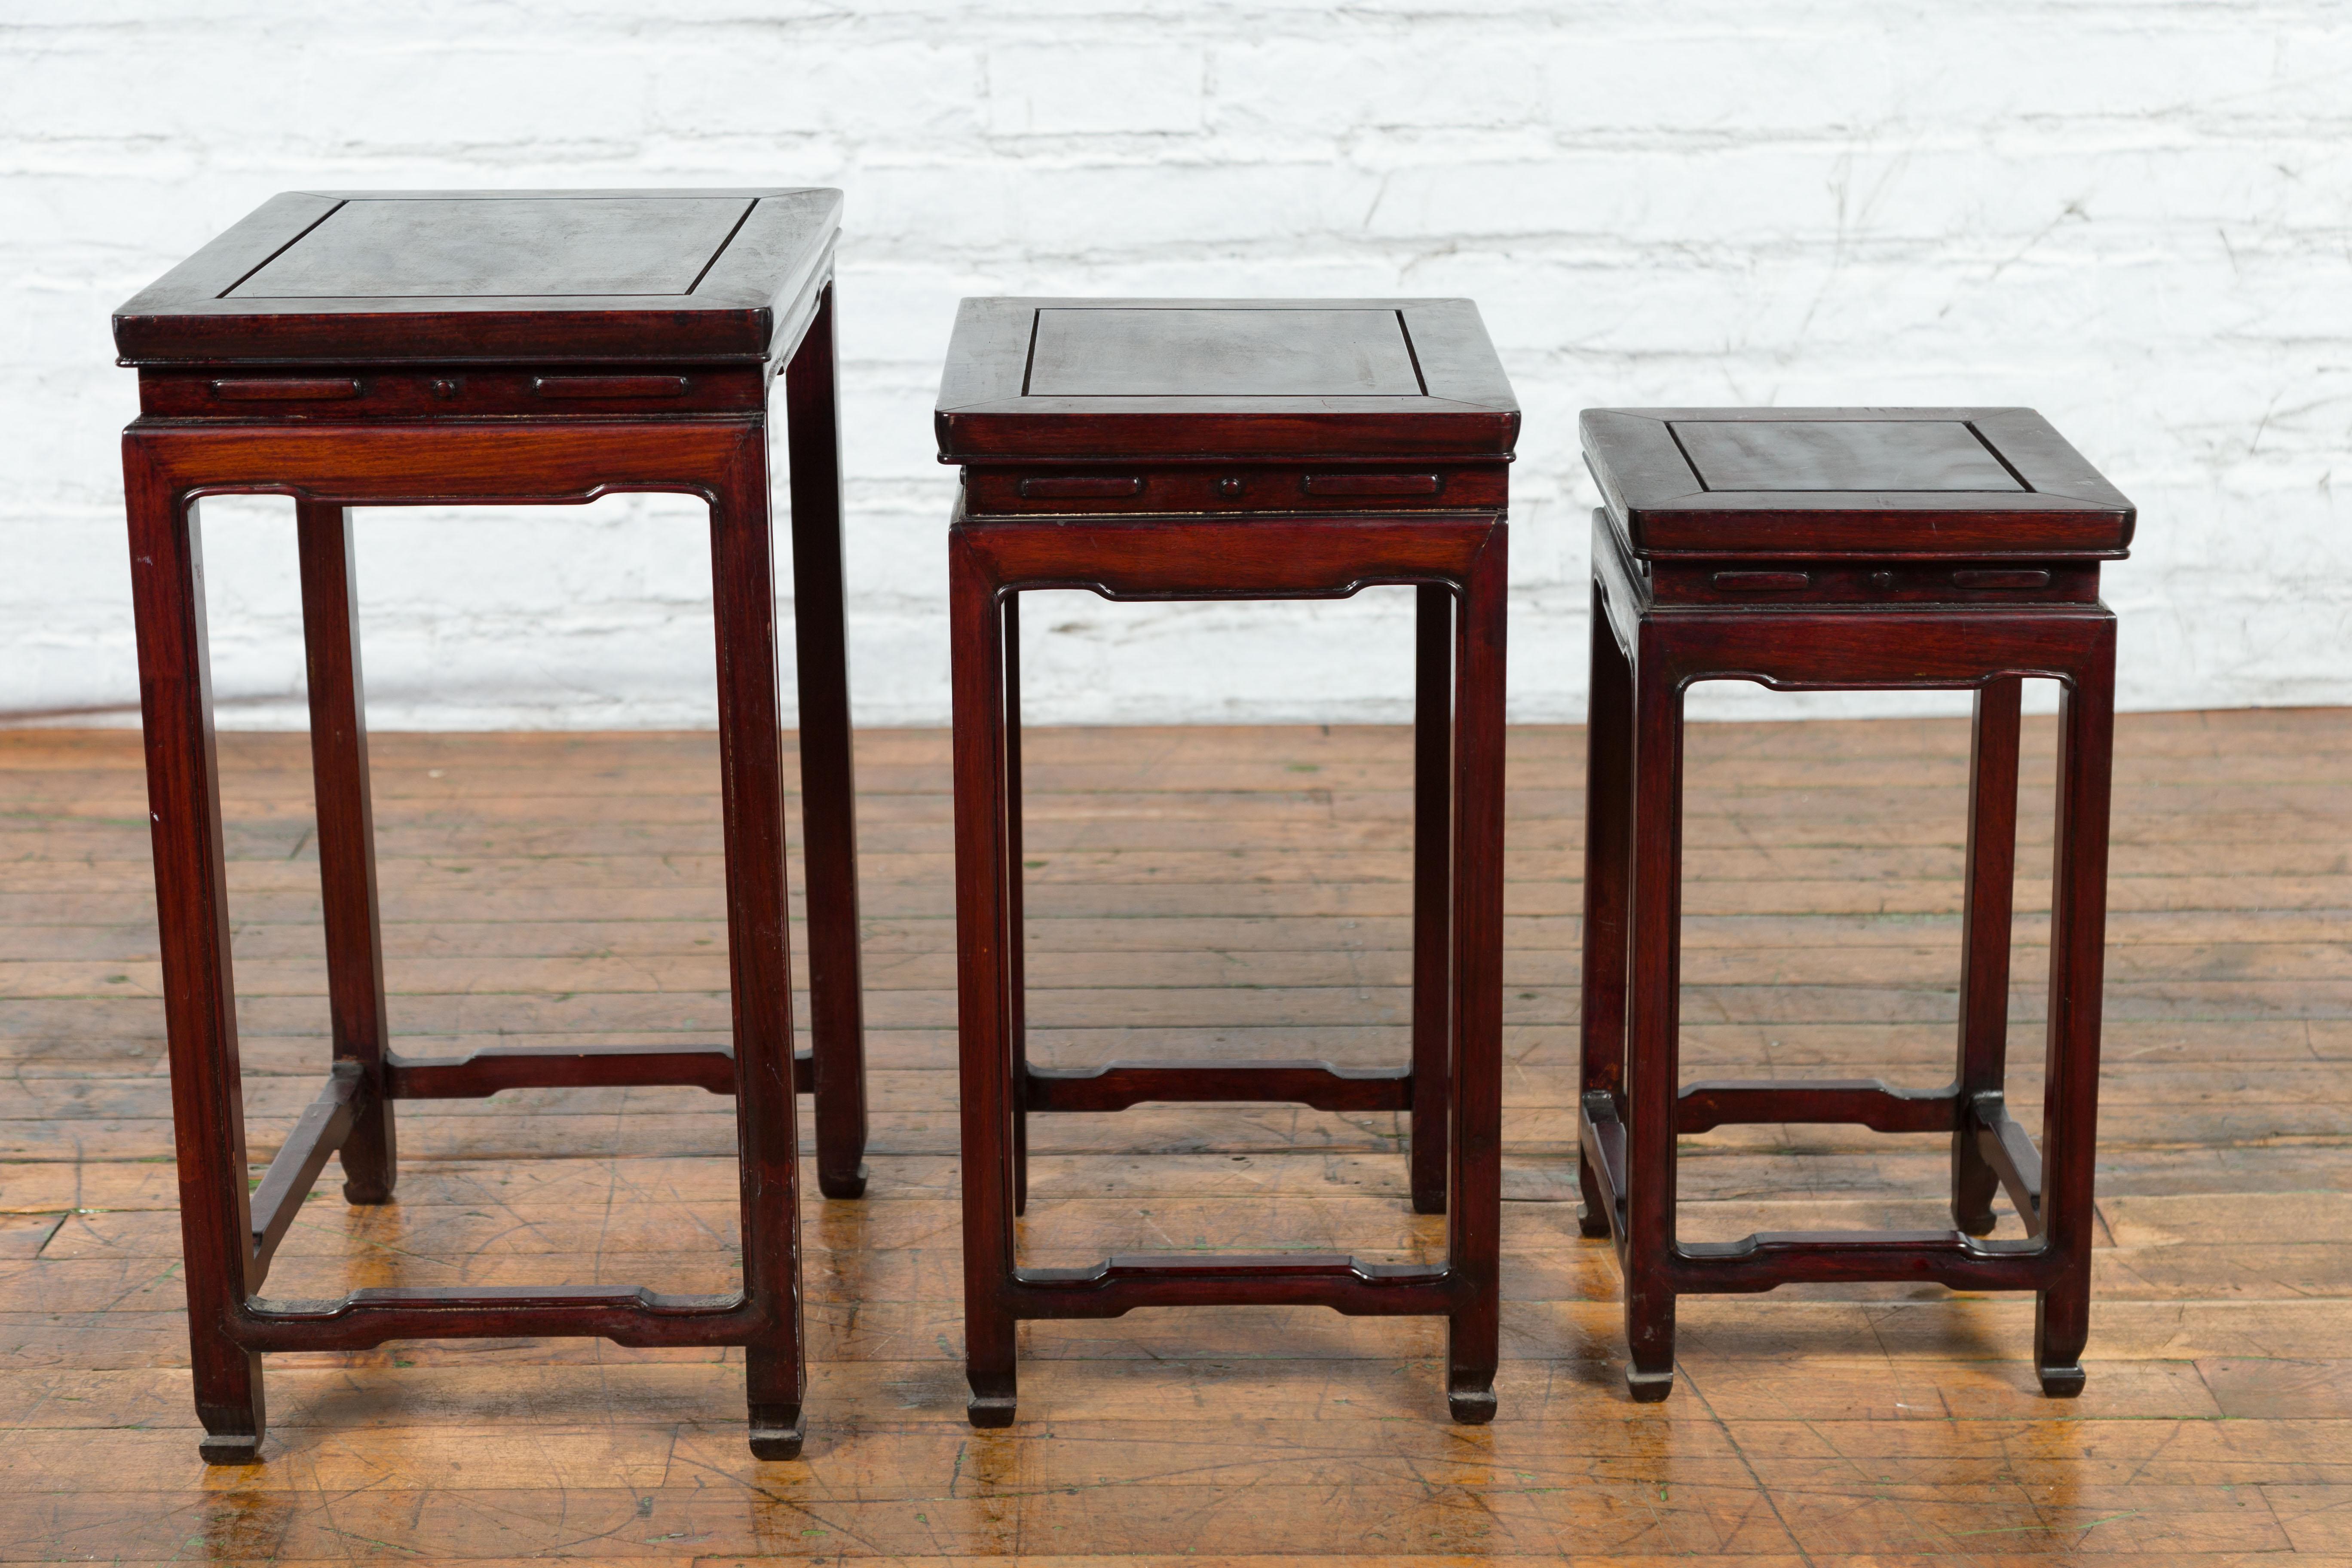 Set of Three Chinese Vintage Rosewood Nesting Tables with Reddish Brown Patina For Sale 1